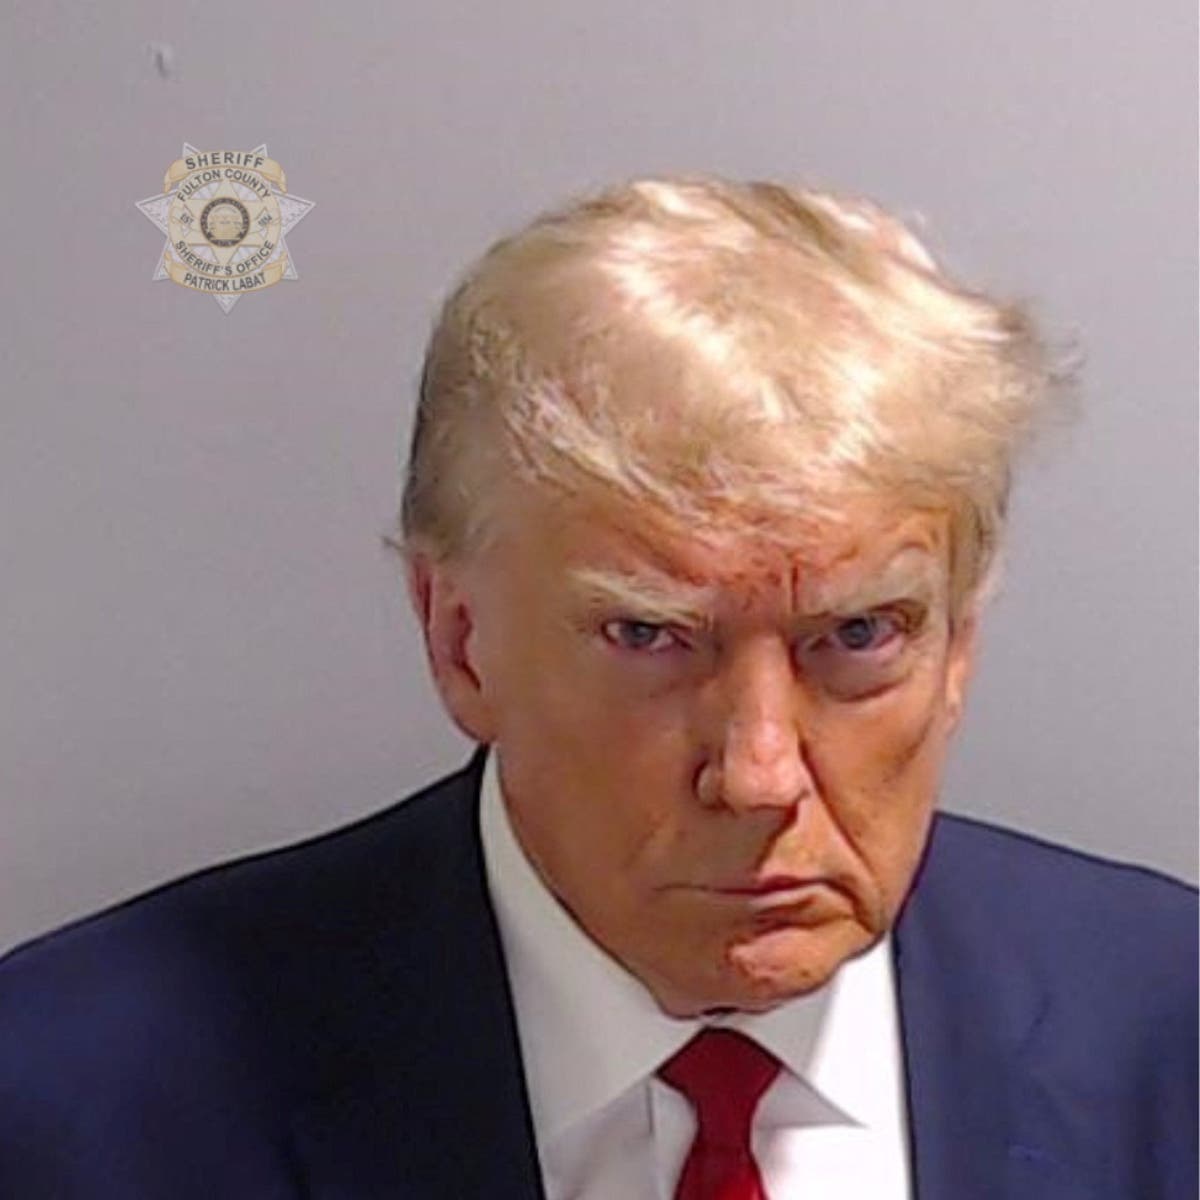 Trump news today: Trump cashes in on historic mug shot with ‘never surrender’ merch as last co-defendants booked at jail